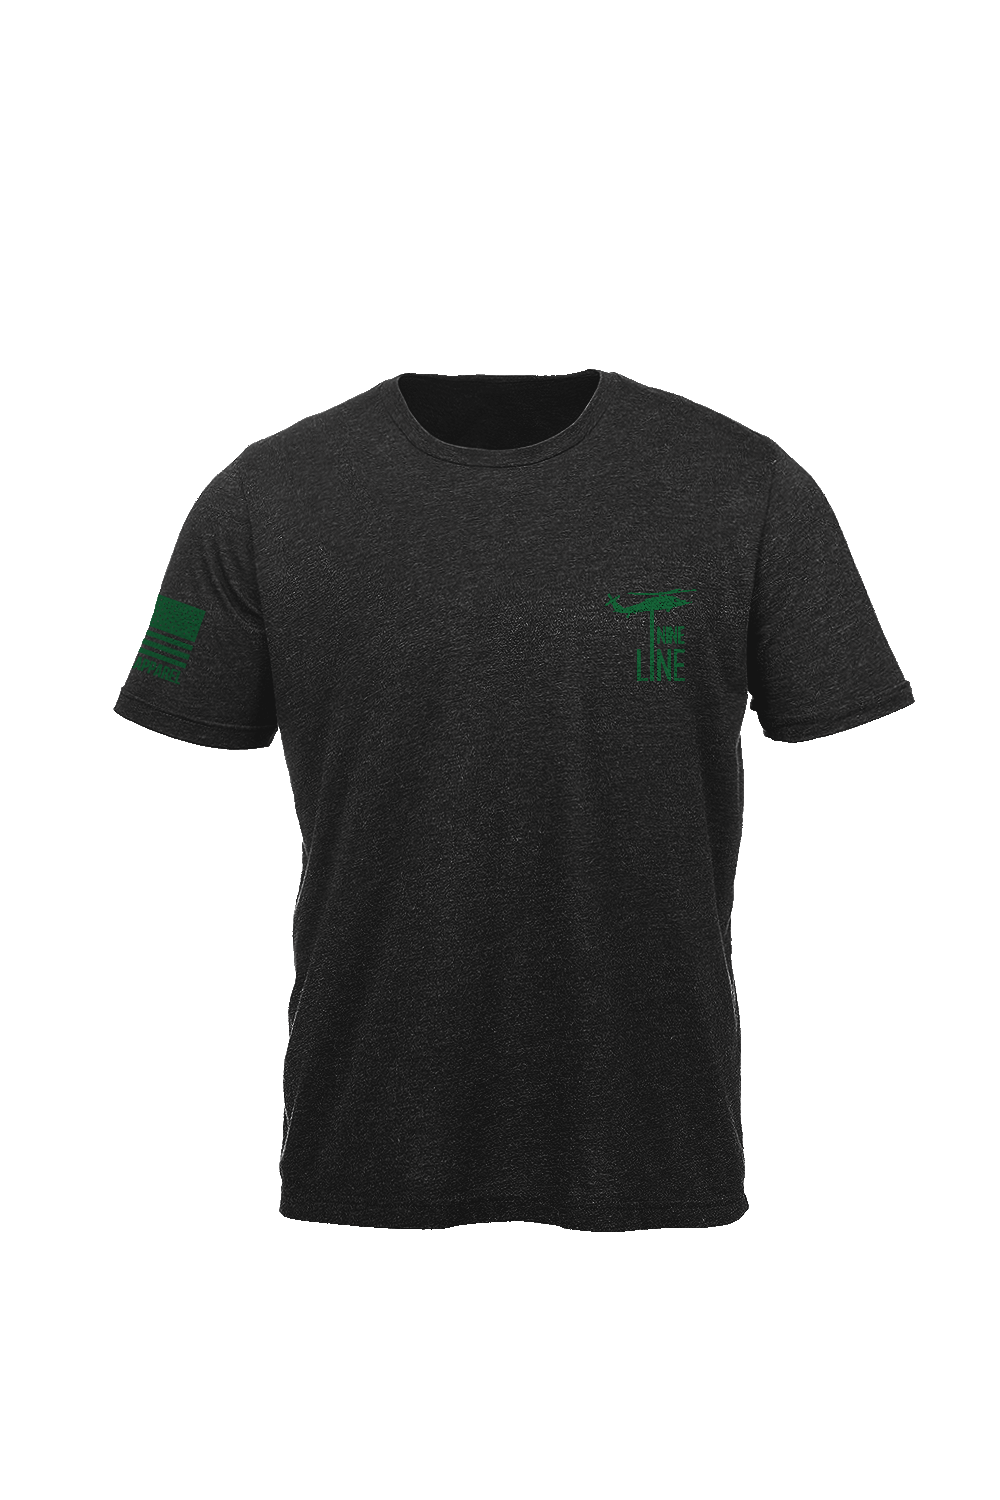 Youth Triblend T-Shirt - St. Patrick's Day Men of Law - Nine Line Apparel